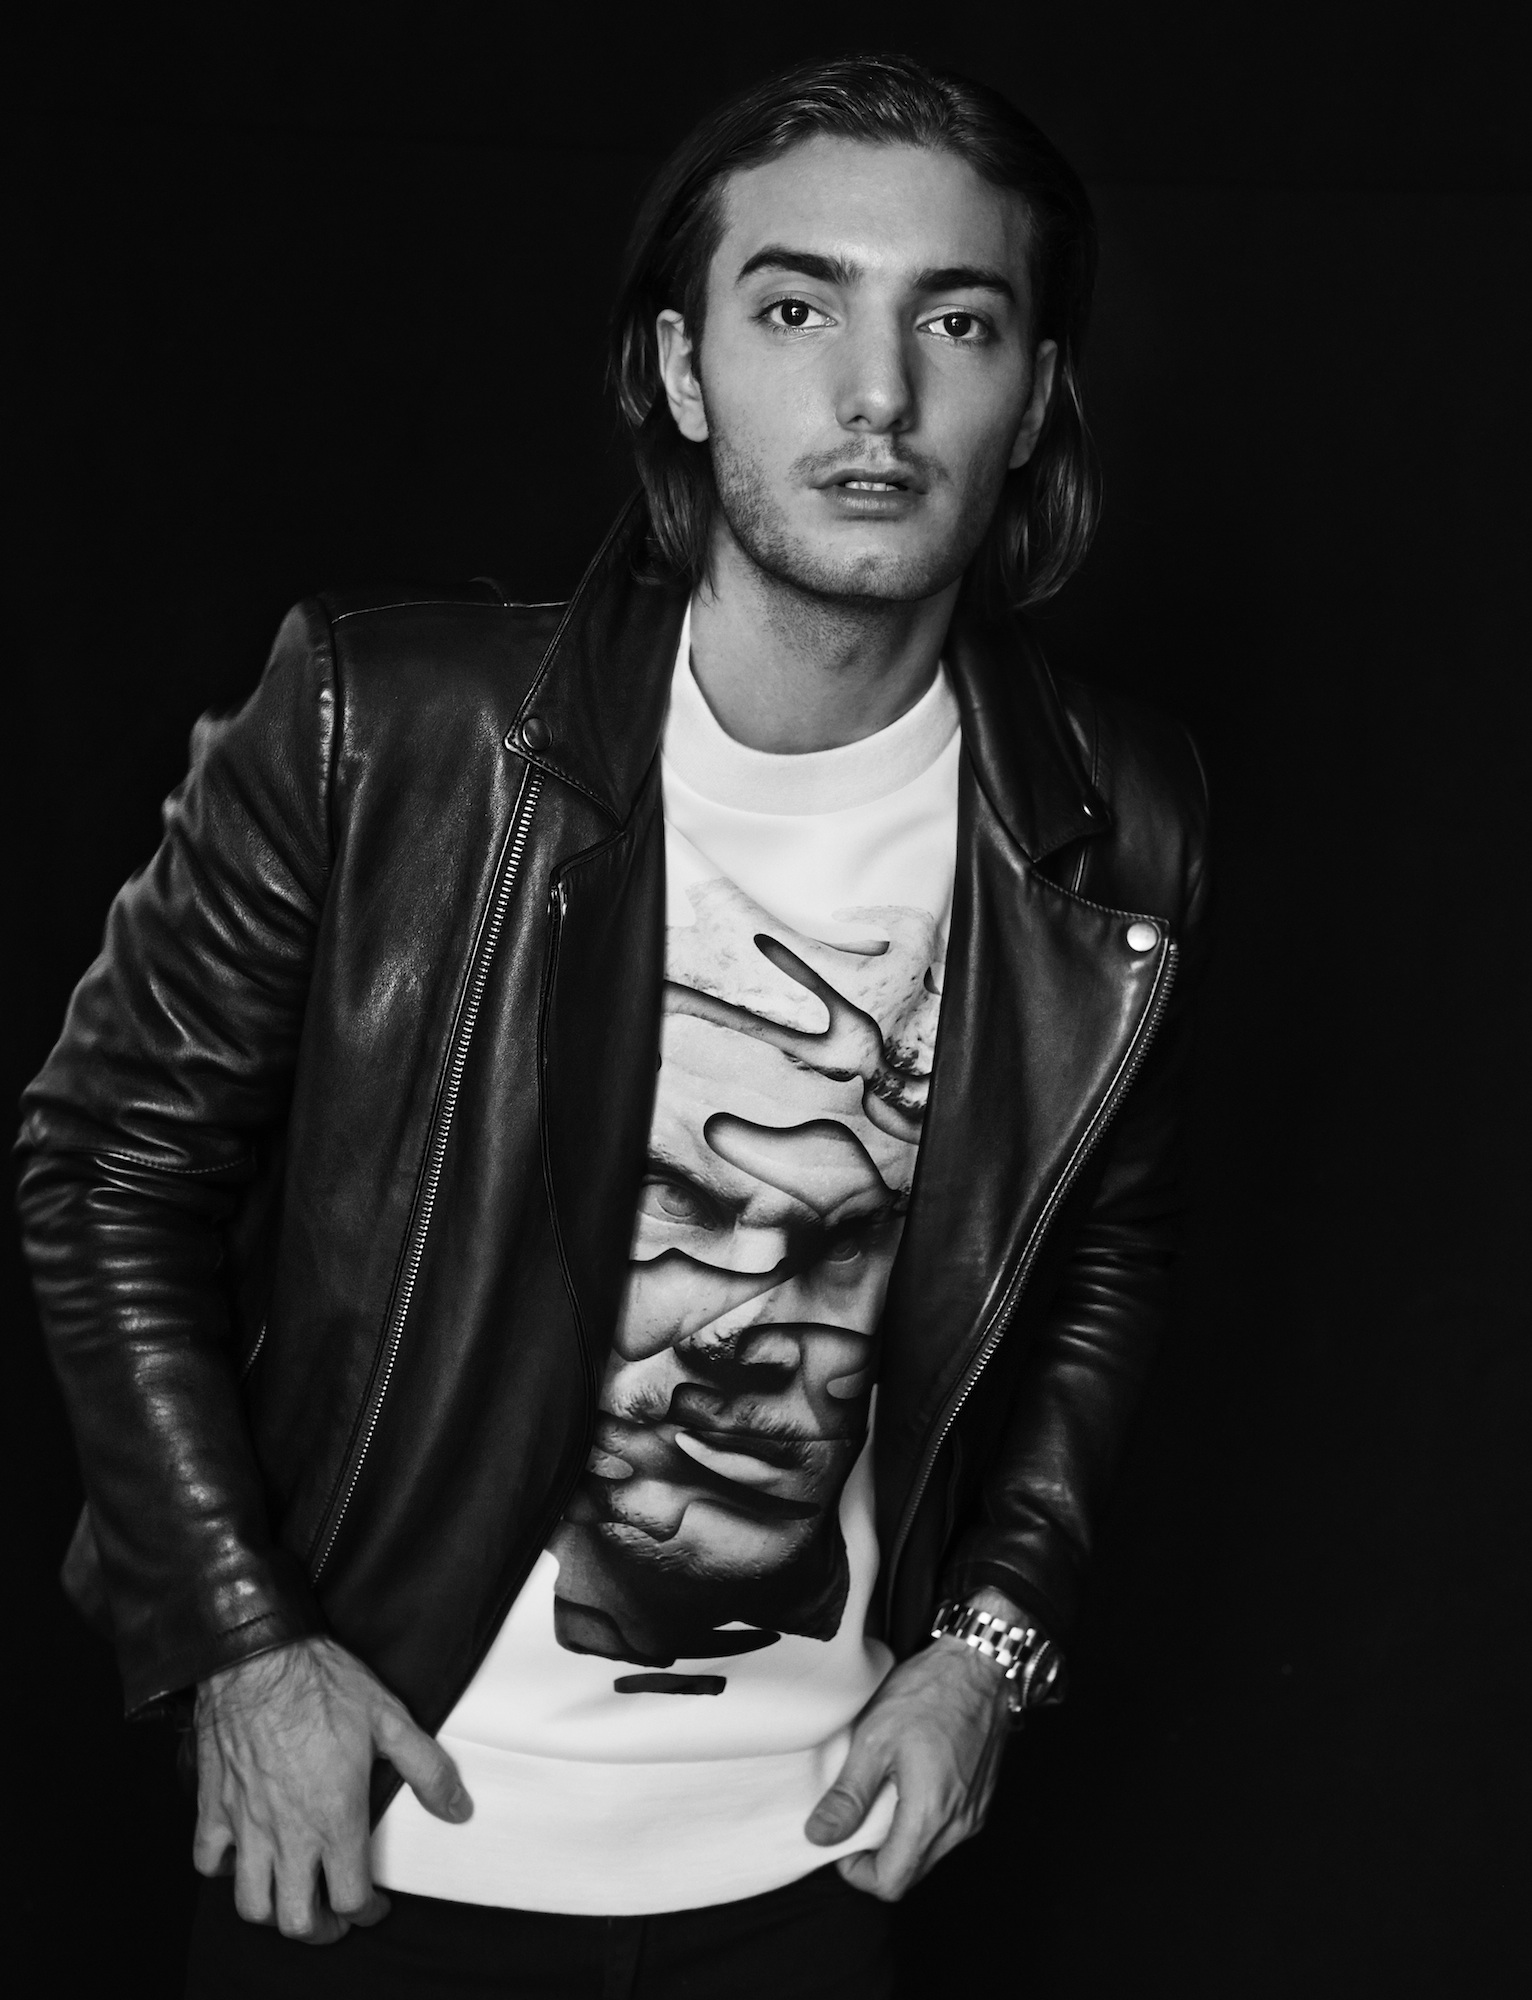 Alesso drops 'Cool' music video